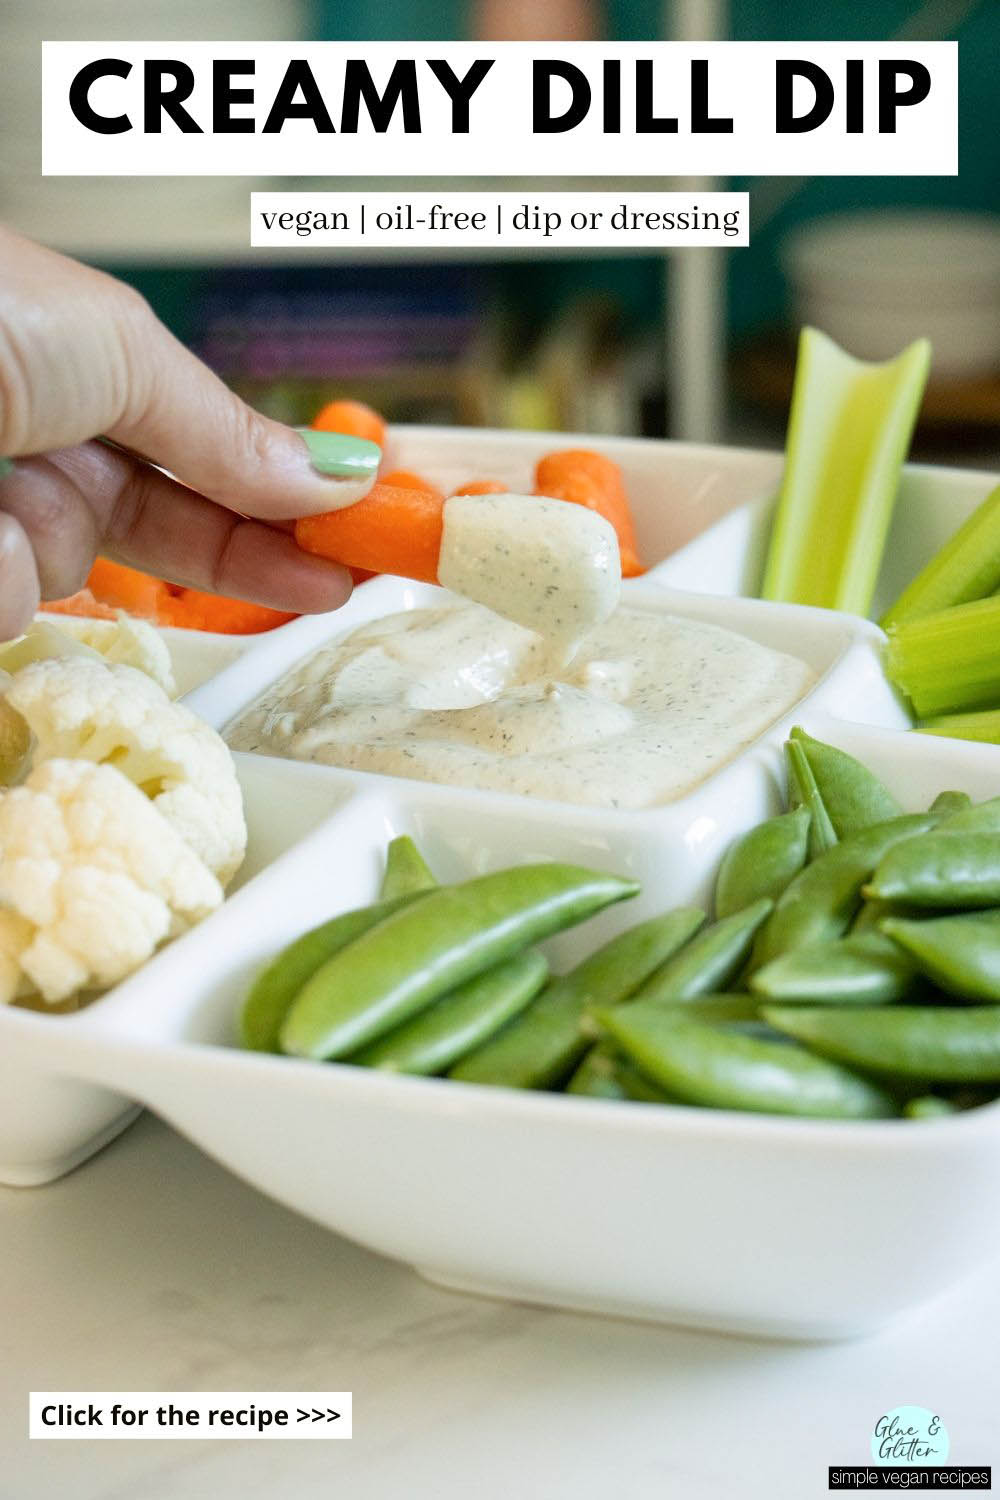 dipping a carrot into vegan dill dip on a tray surrounded by vegetables